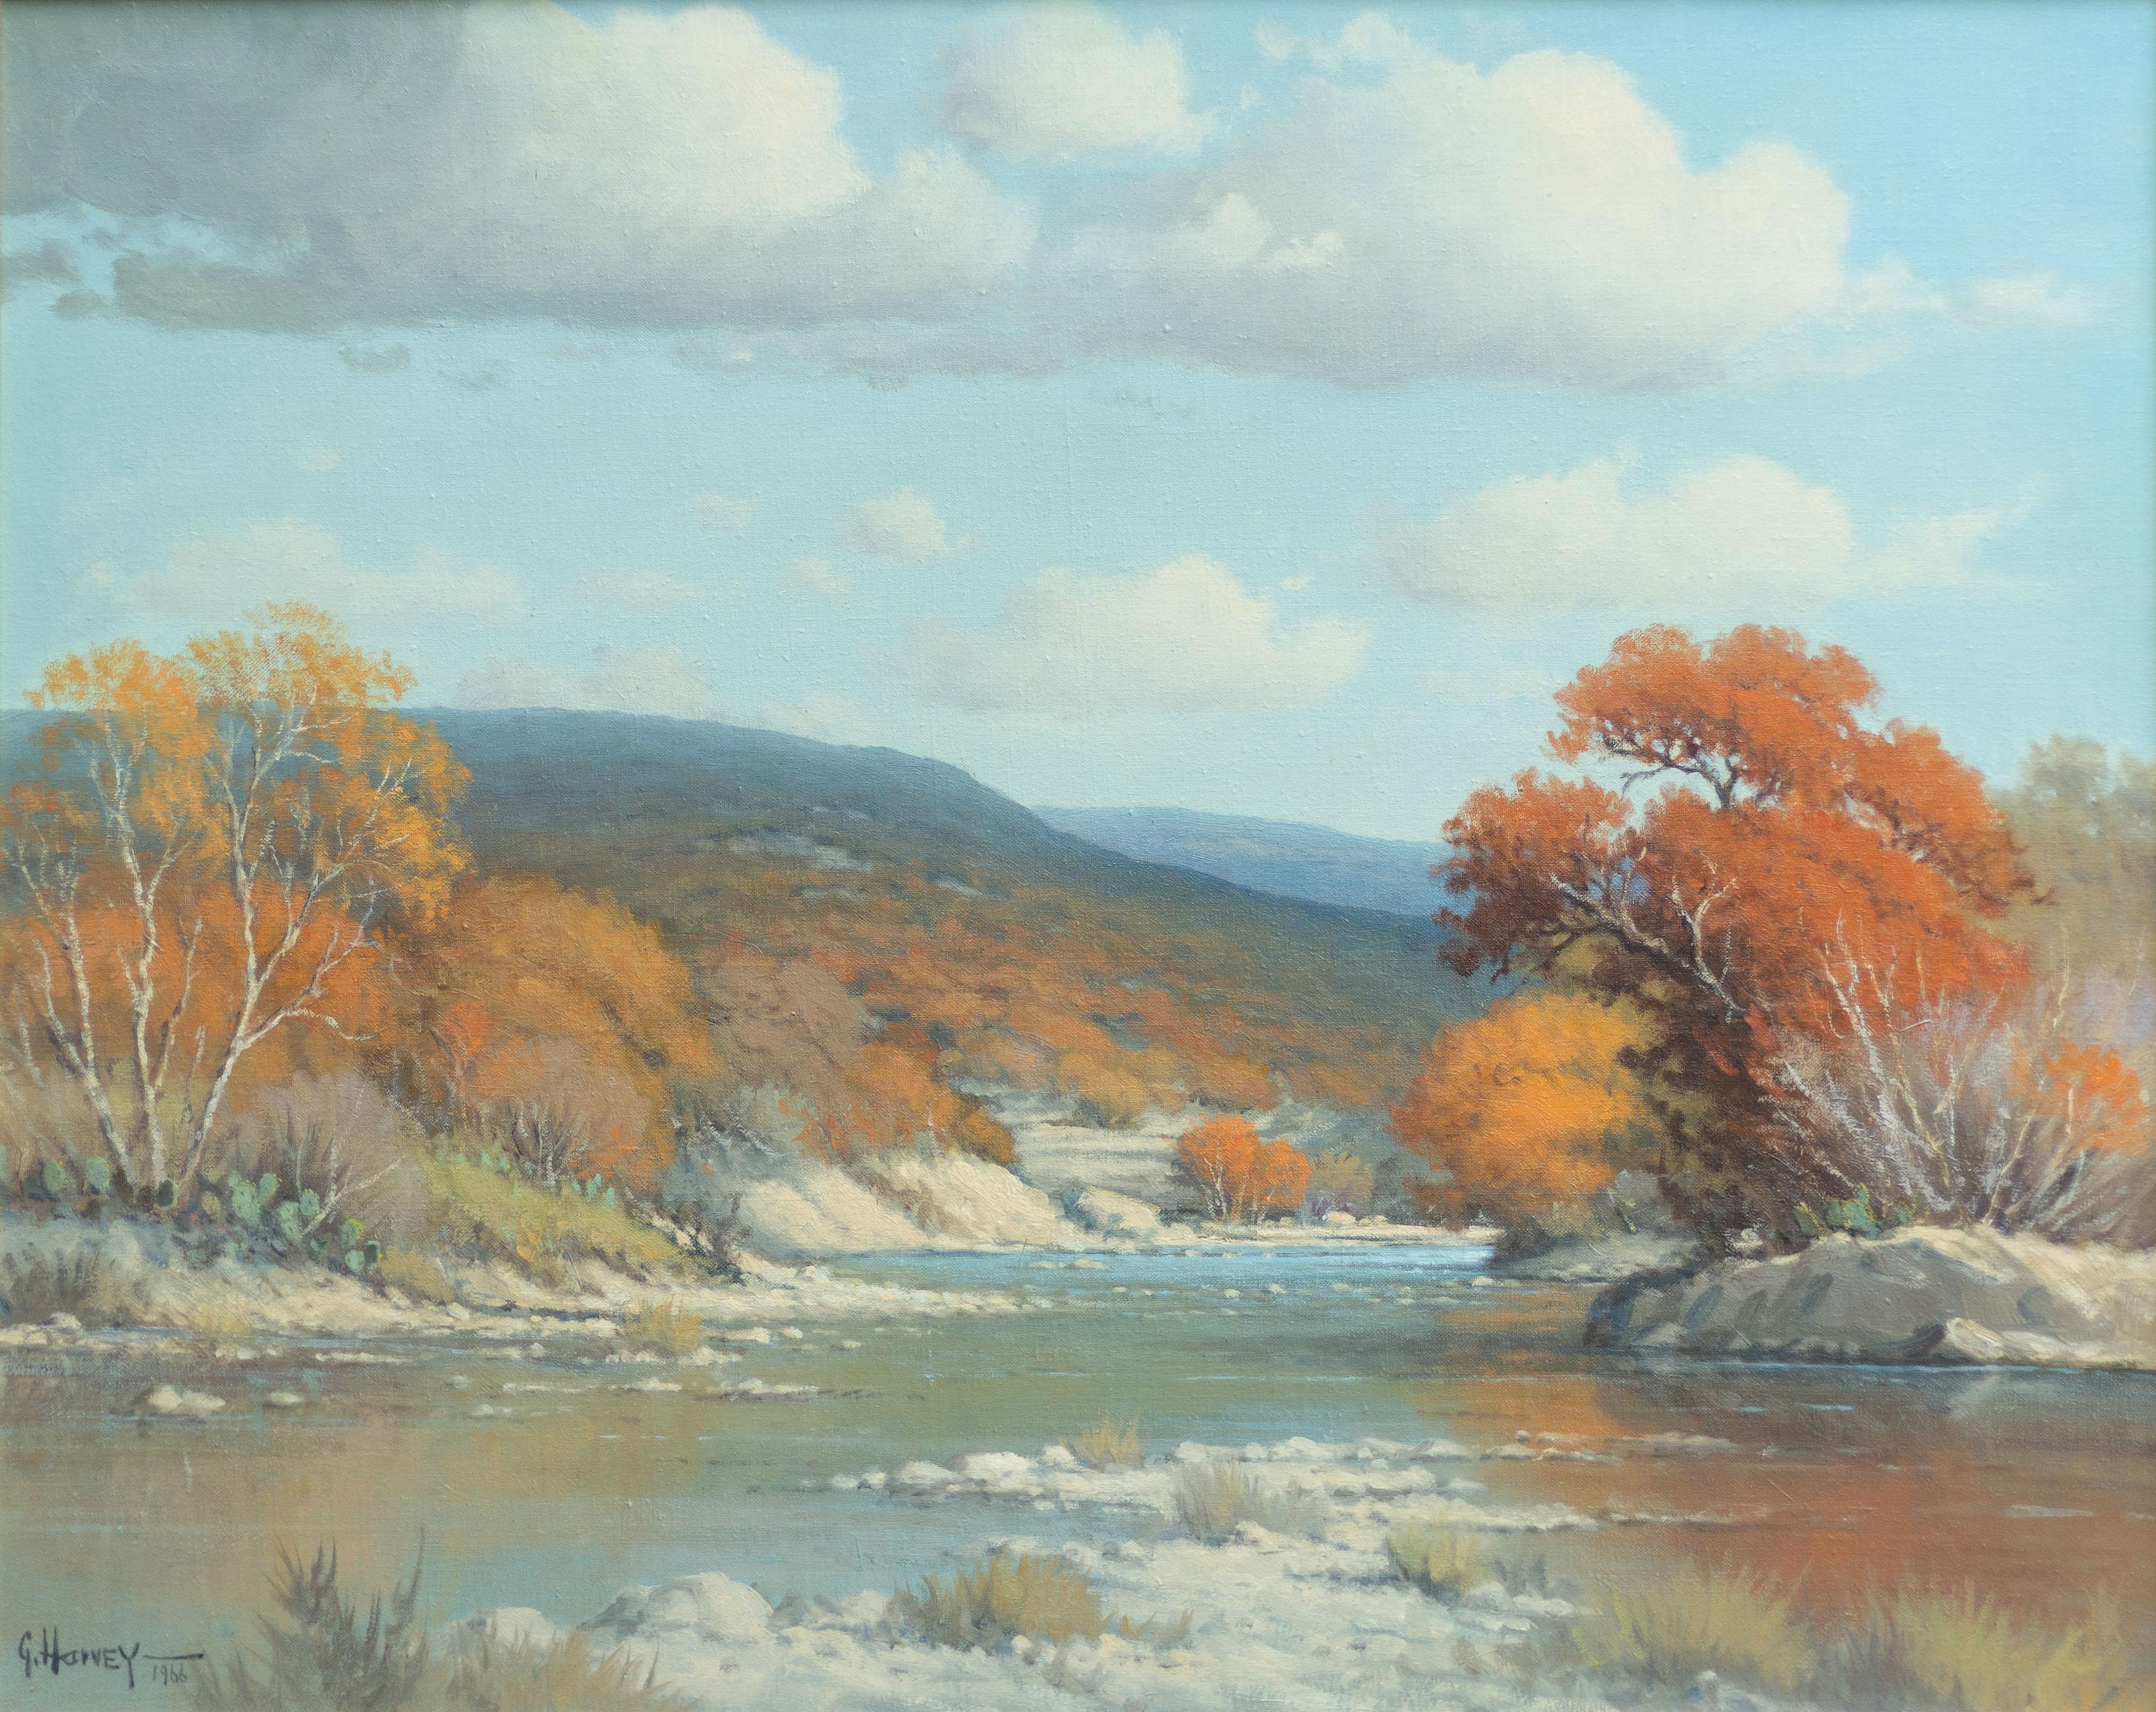 Creek in Autumn - Painting by G. Harvey